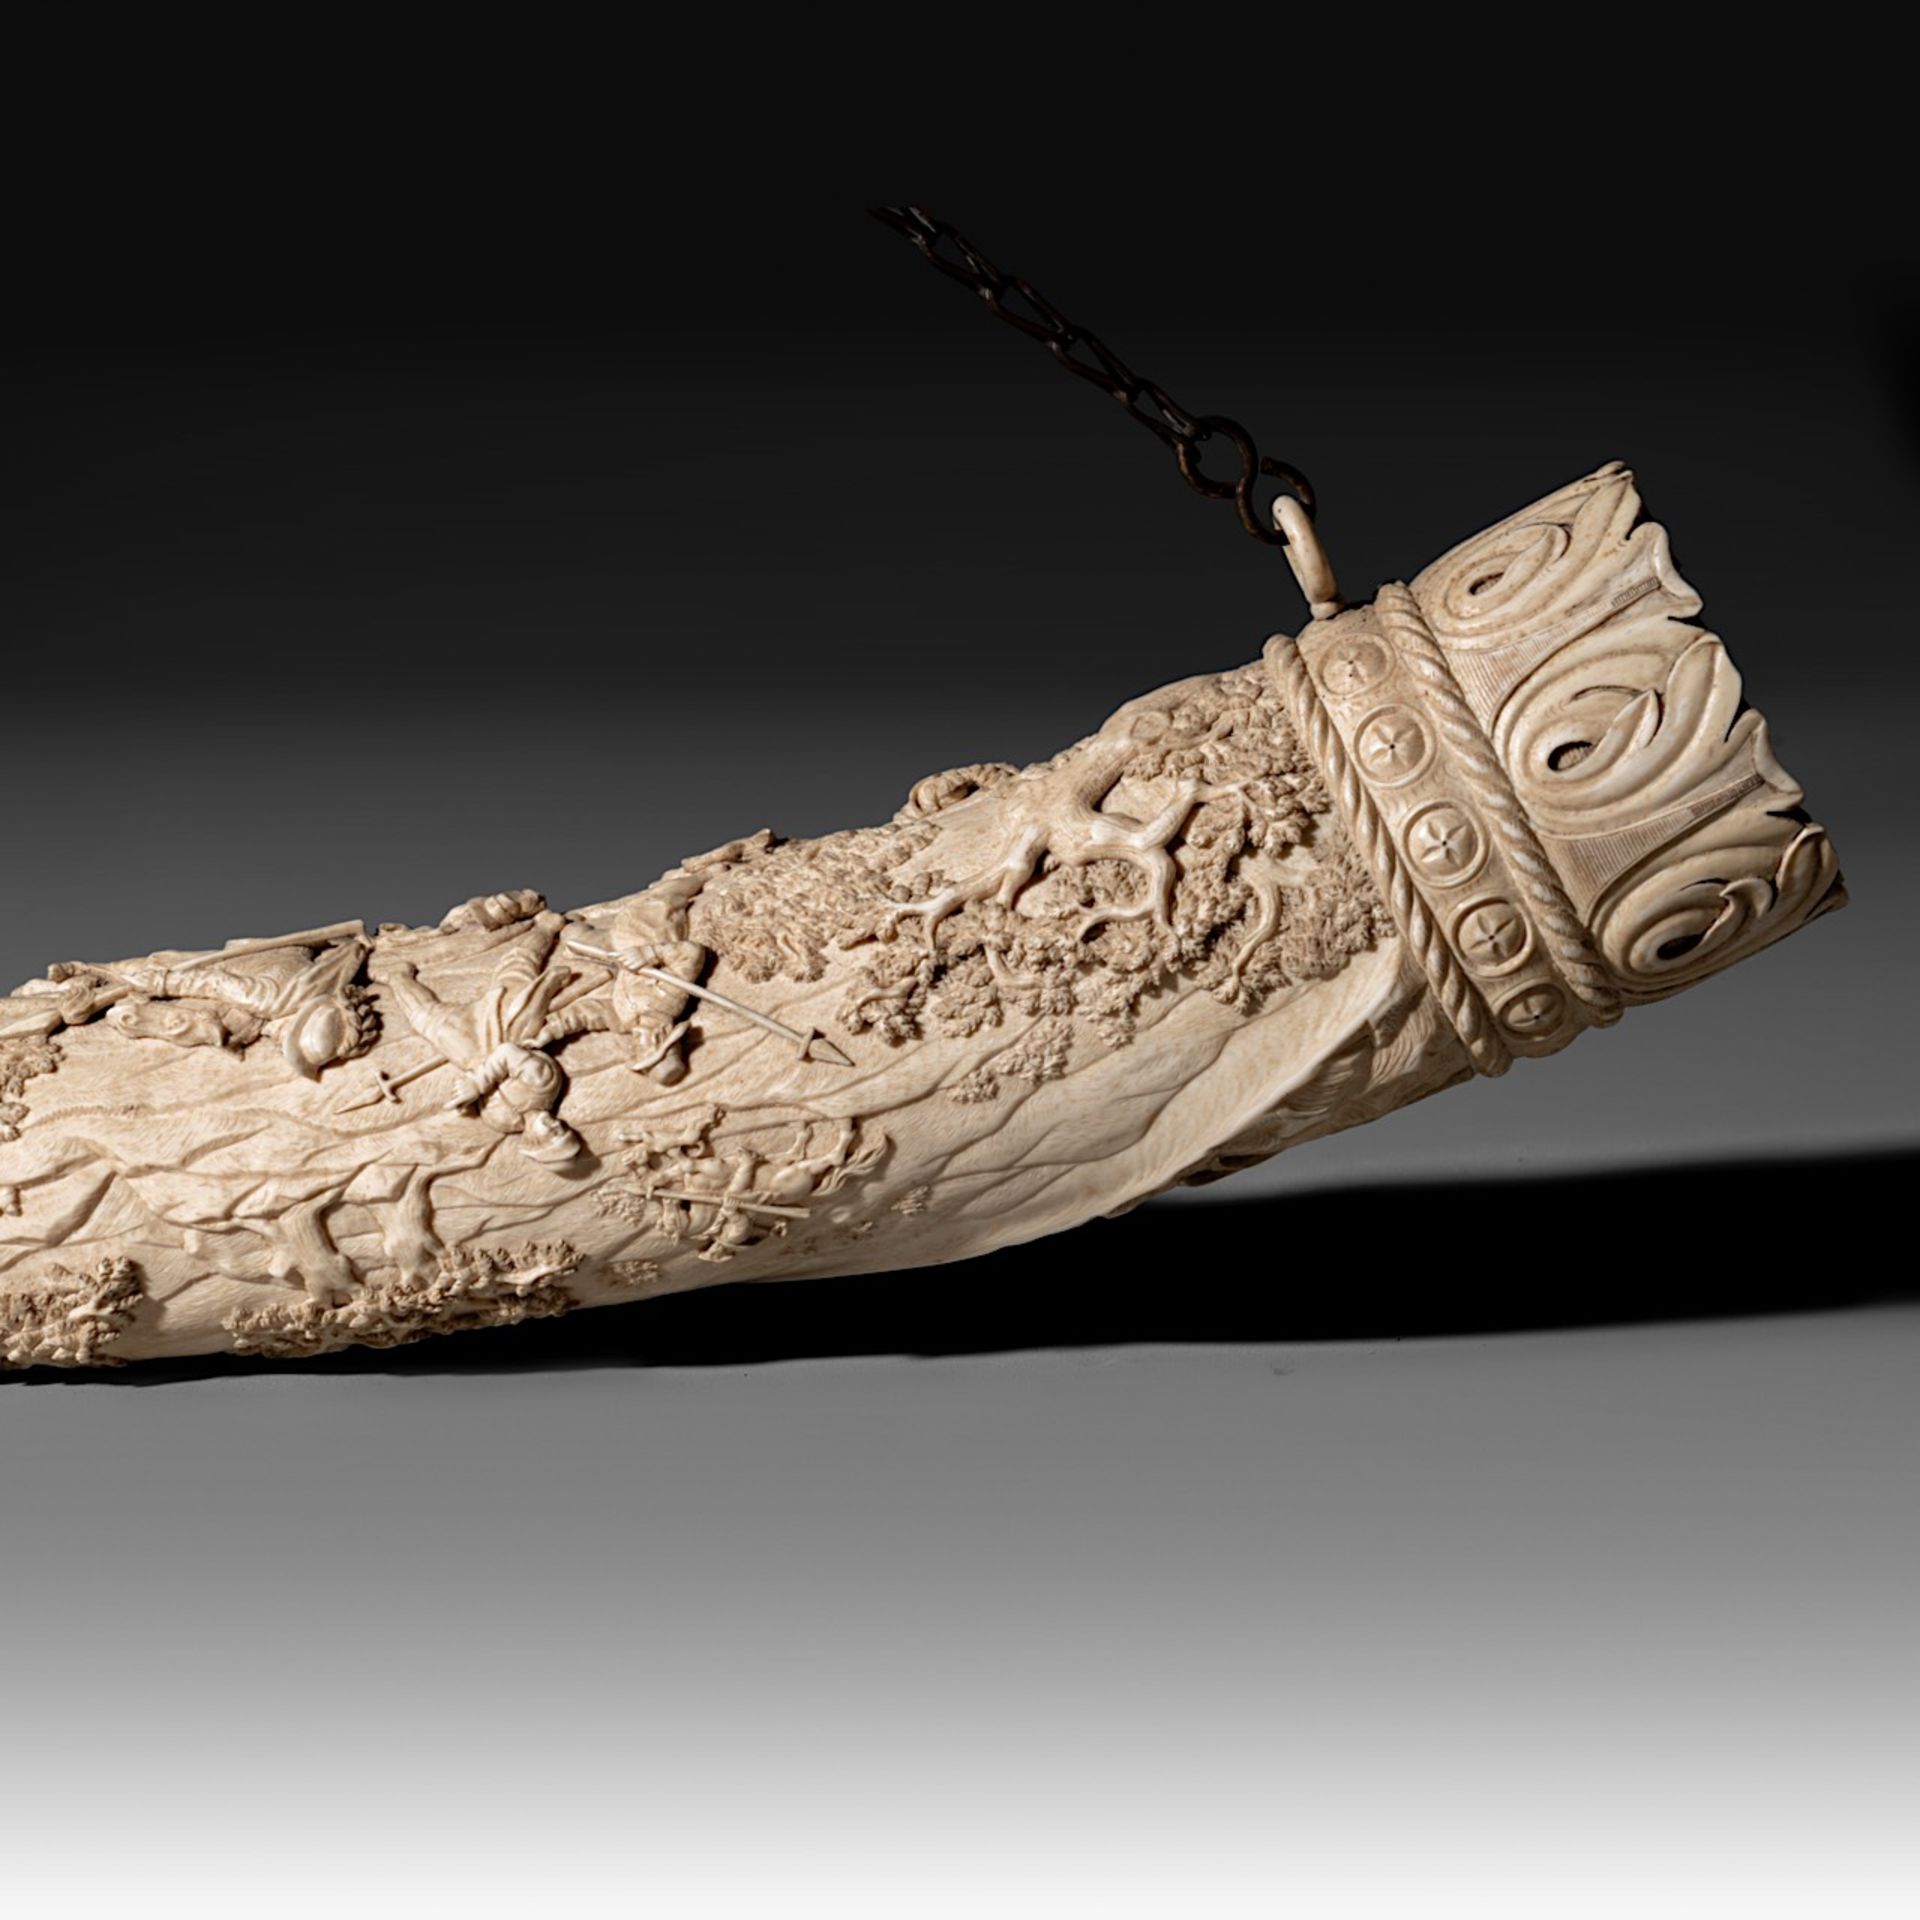 A 19th-century ivory hunting horn, last quarter 19th century, W 74,5 cm - 2850 g (+) - Image 10 of 11